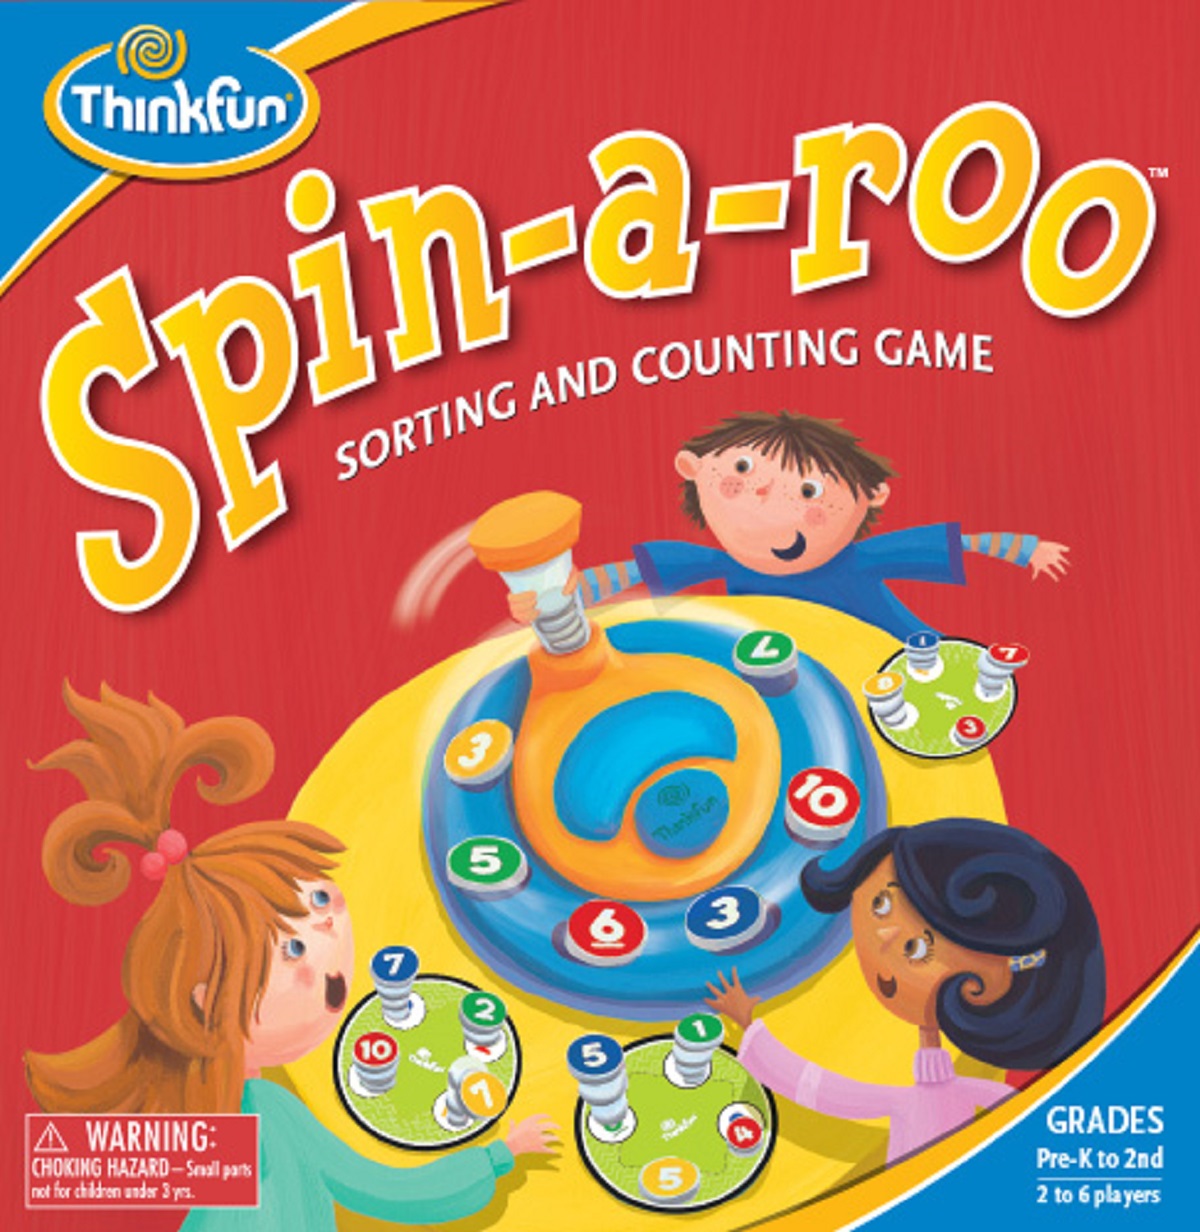 Spin-a-roo